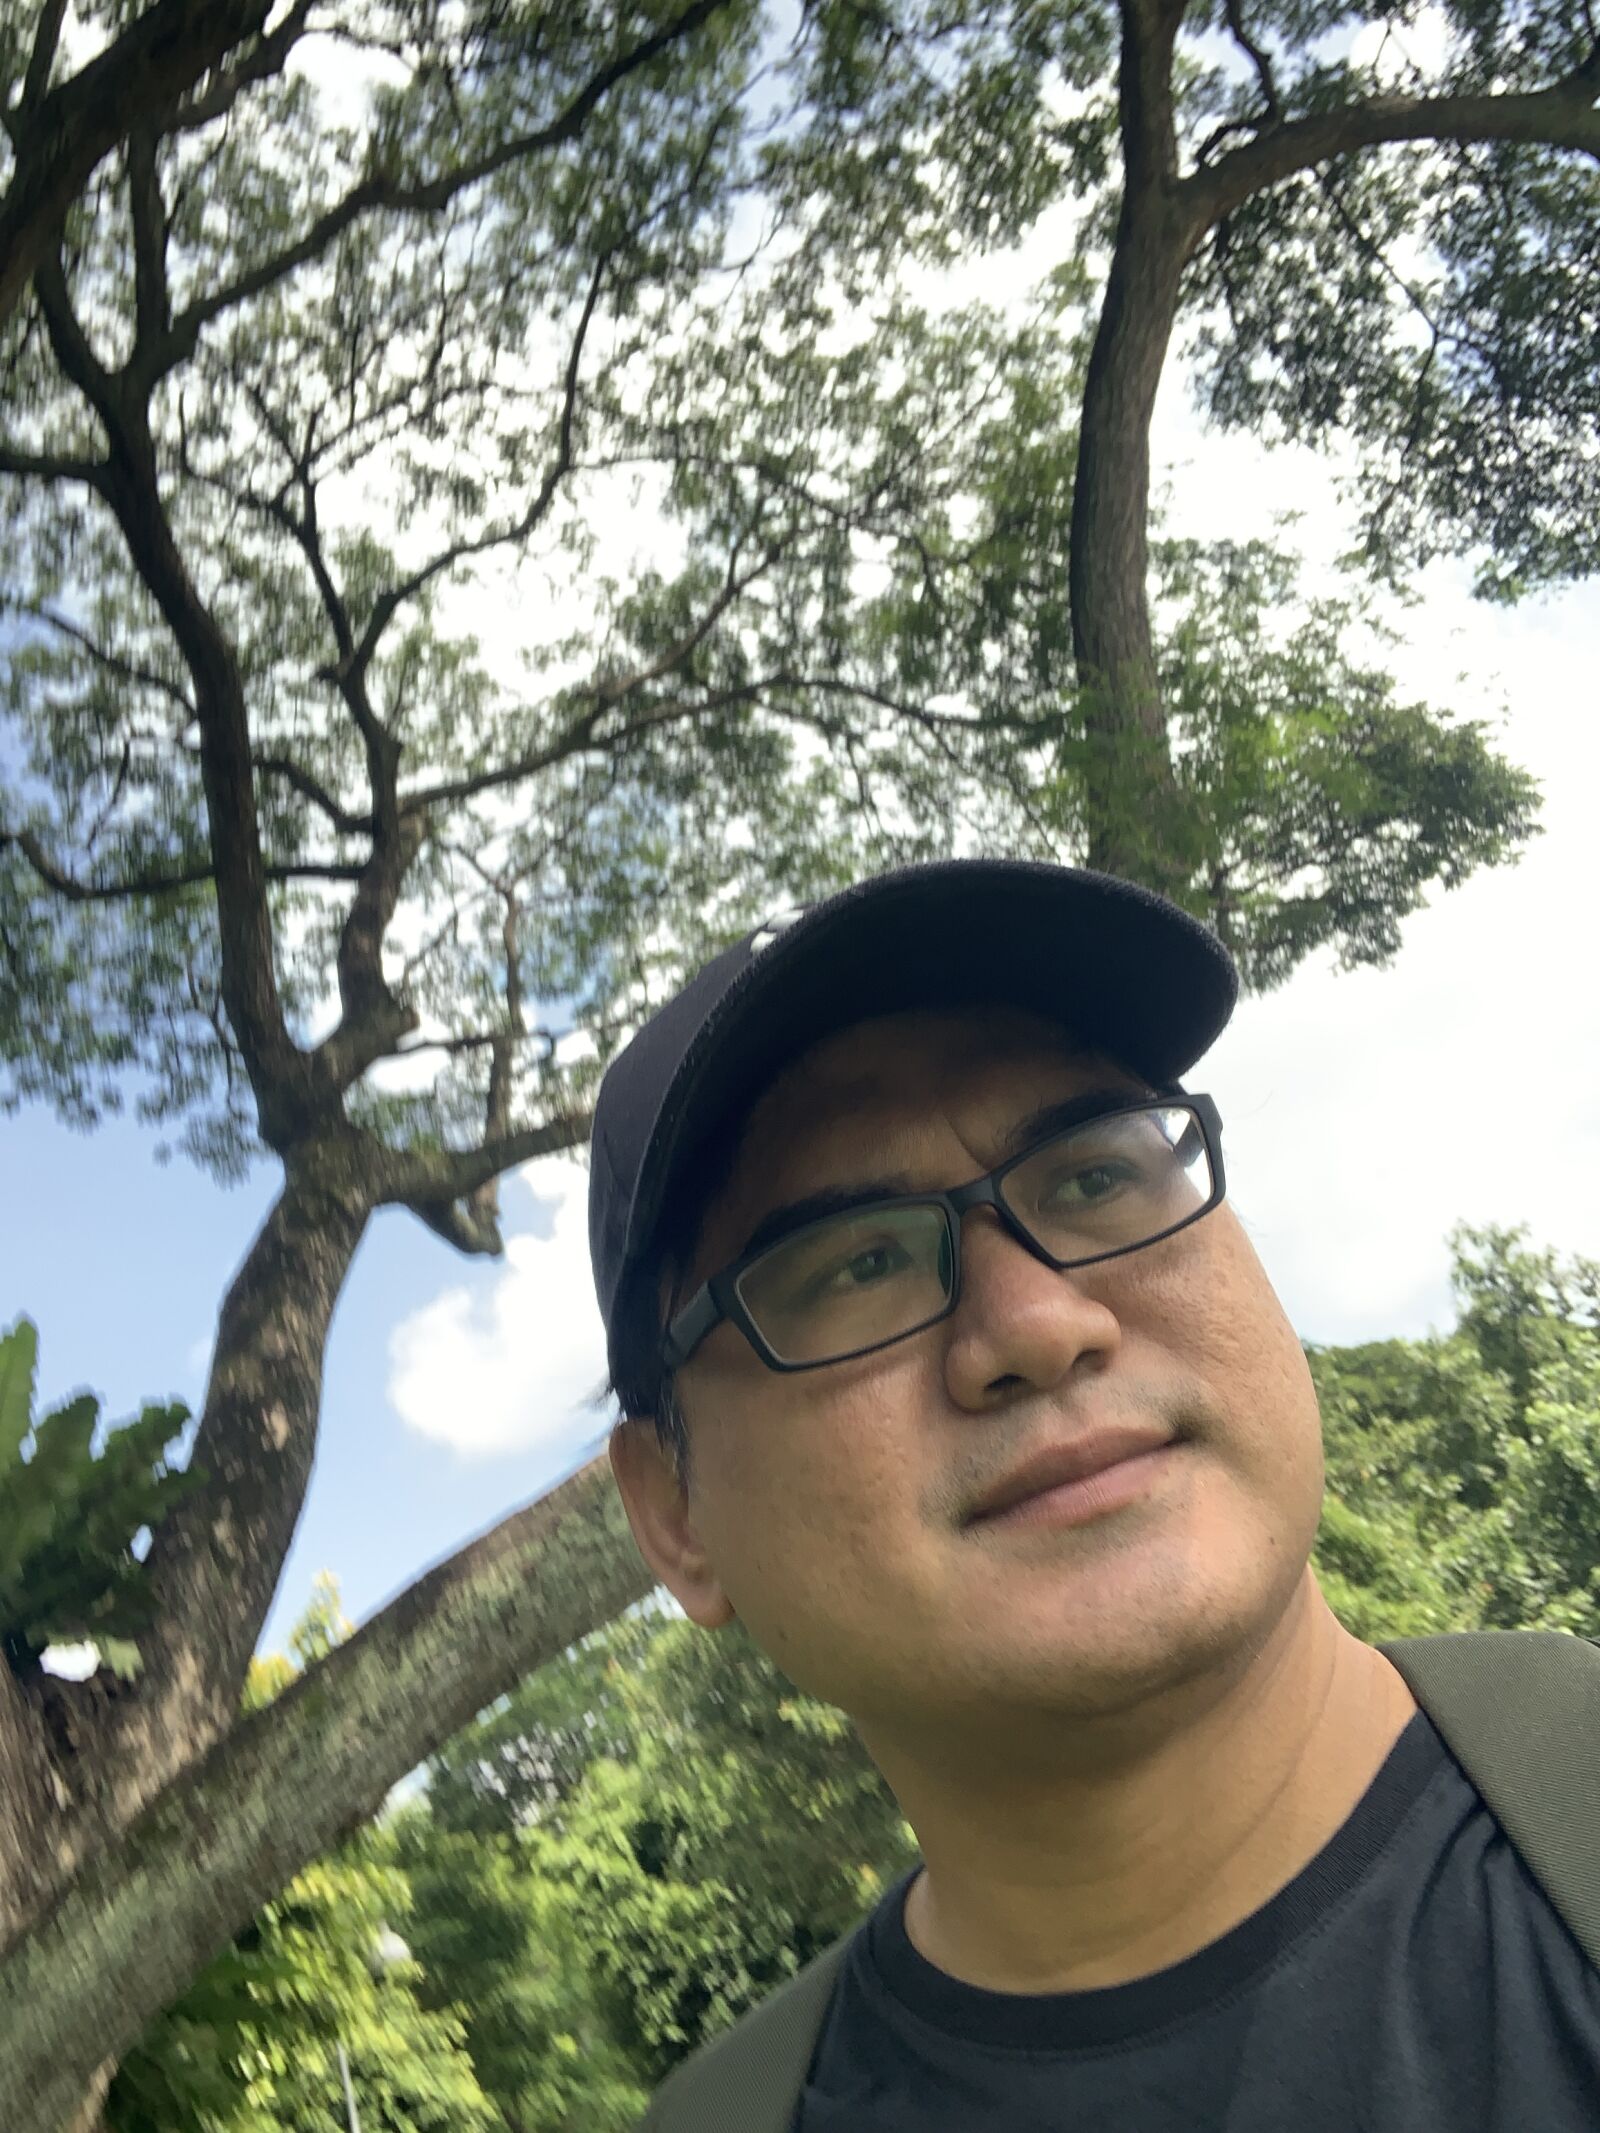 Apple iPhone XR + iPhone XR front camera 2.87mm f/2.2 sample photo. Nature, selfie, holiday photography